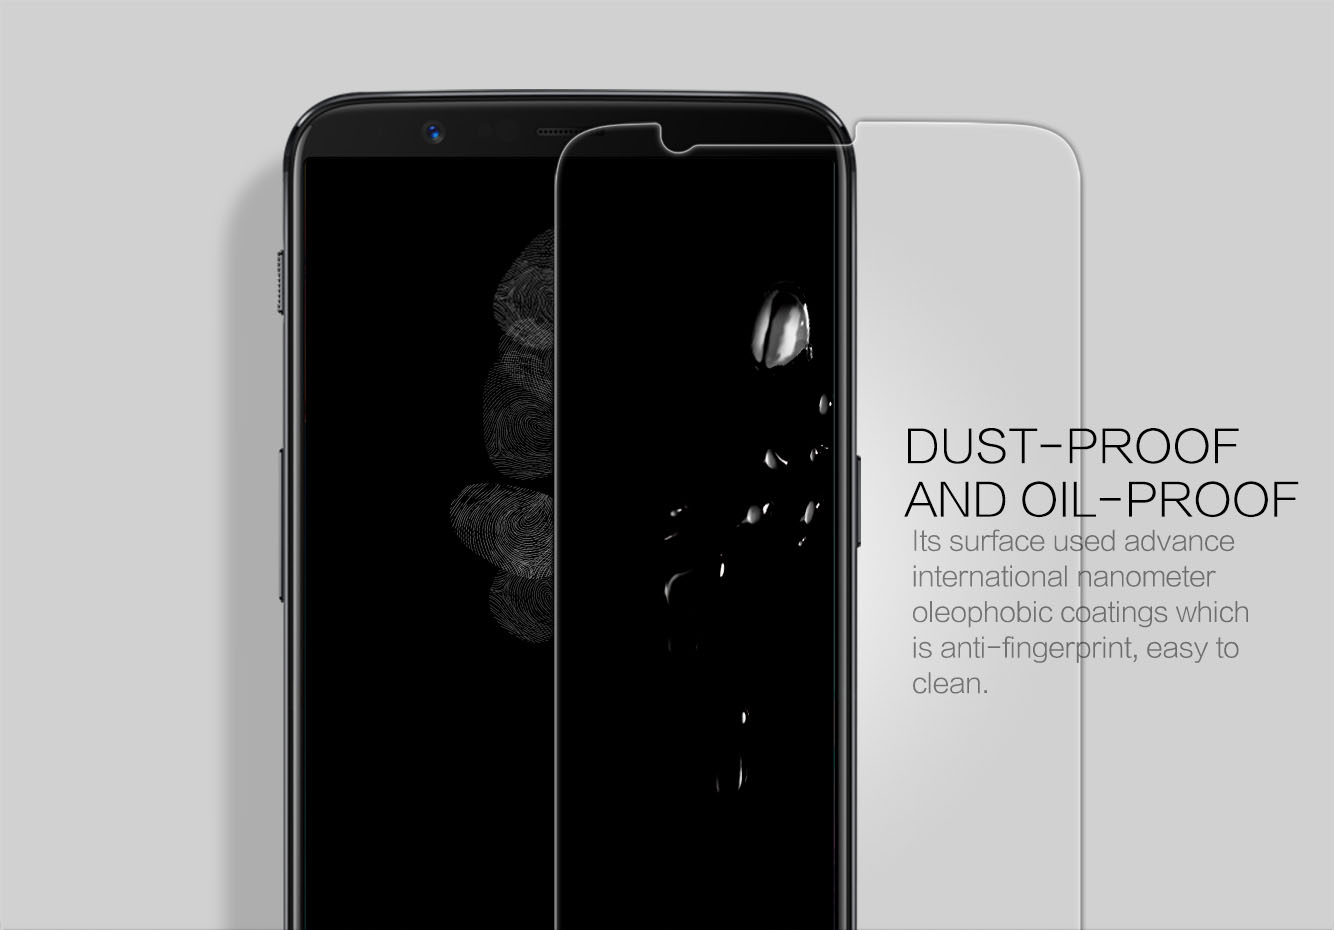 OnePlus 5T screen protector